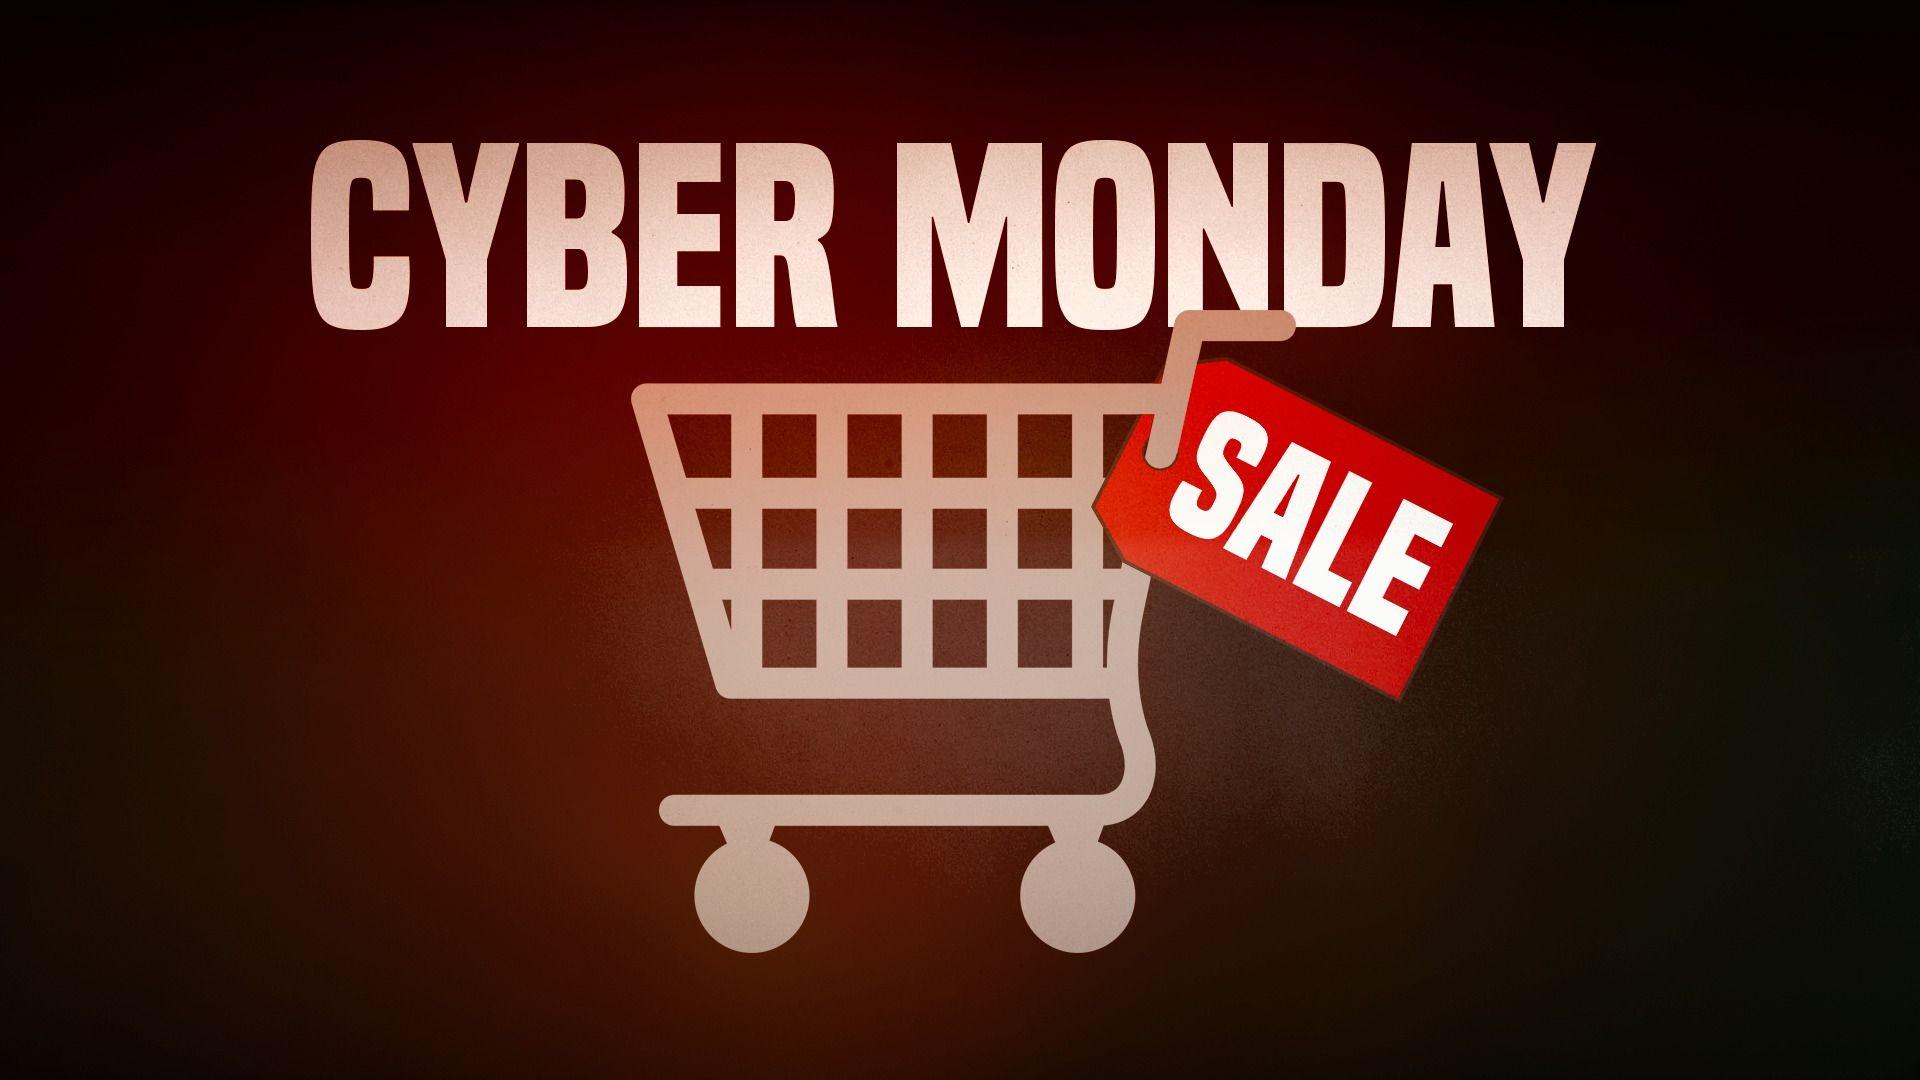 Hotels, tours, travel agencies promising Cyber Monday deals